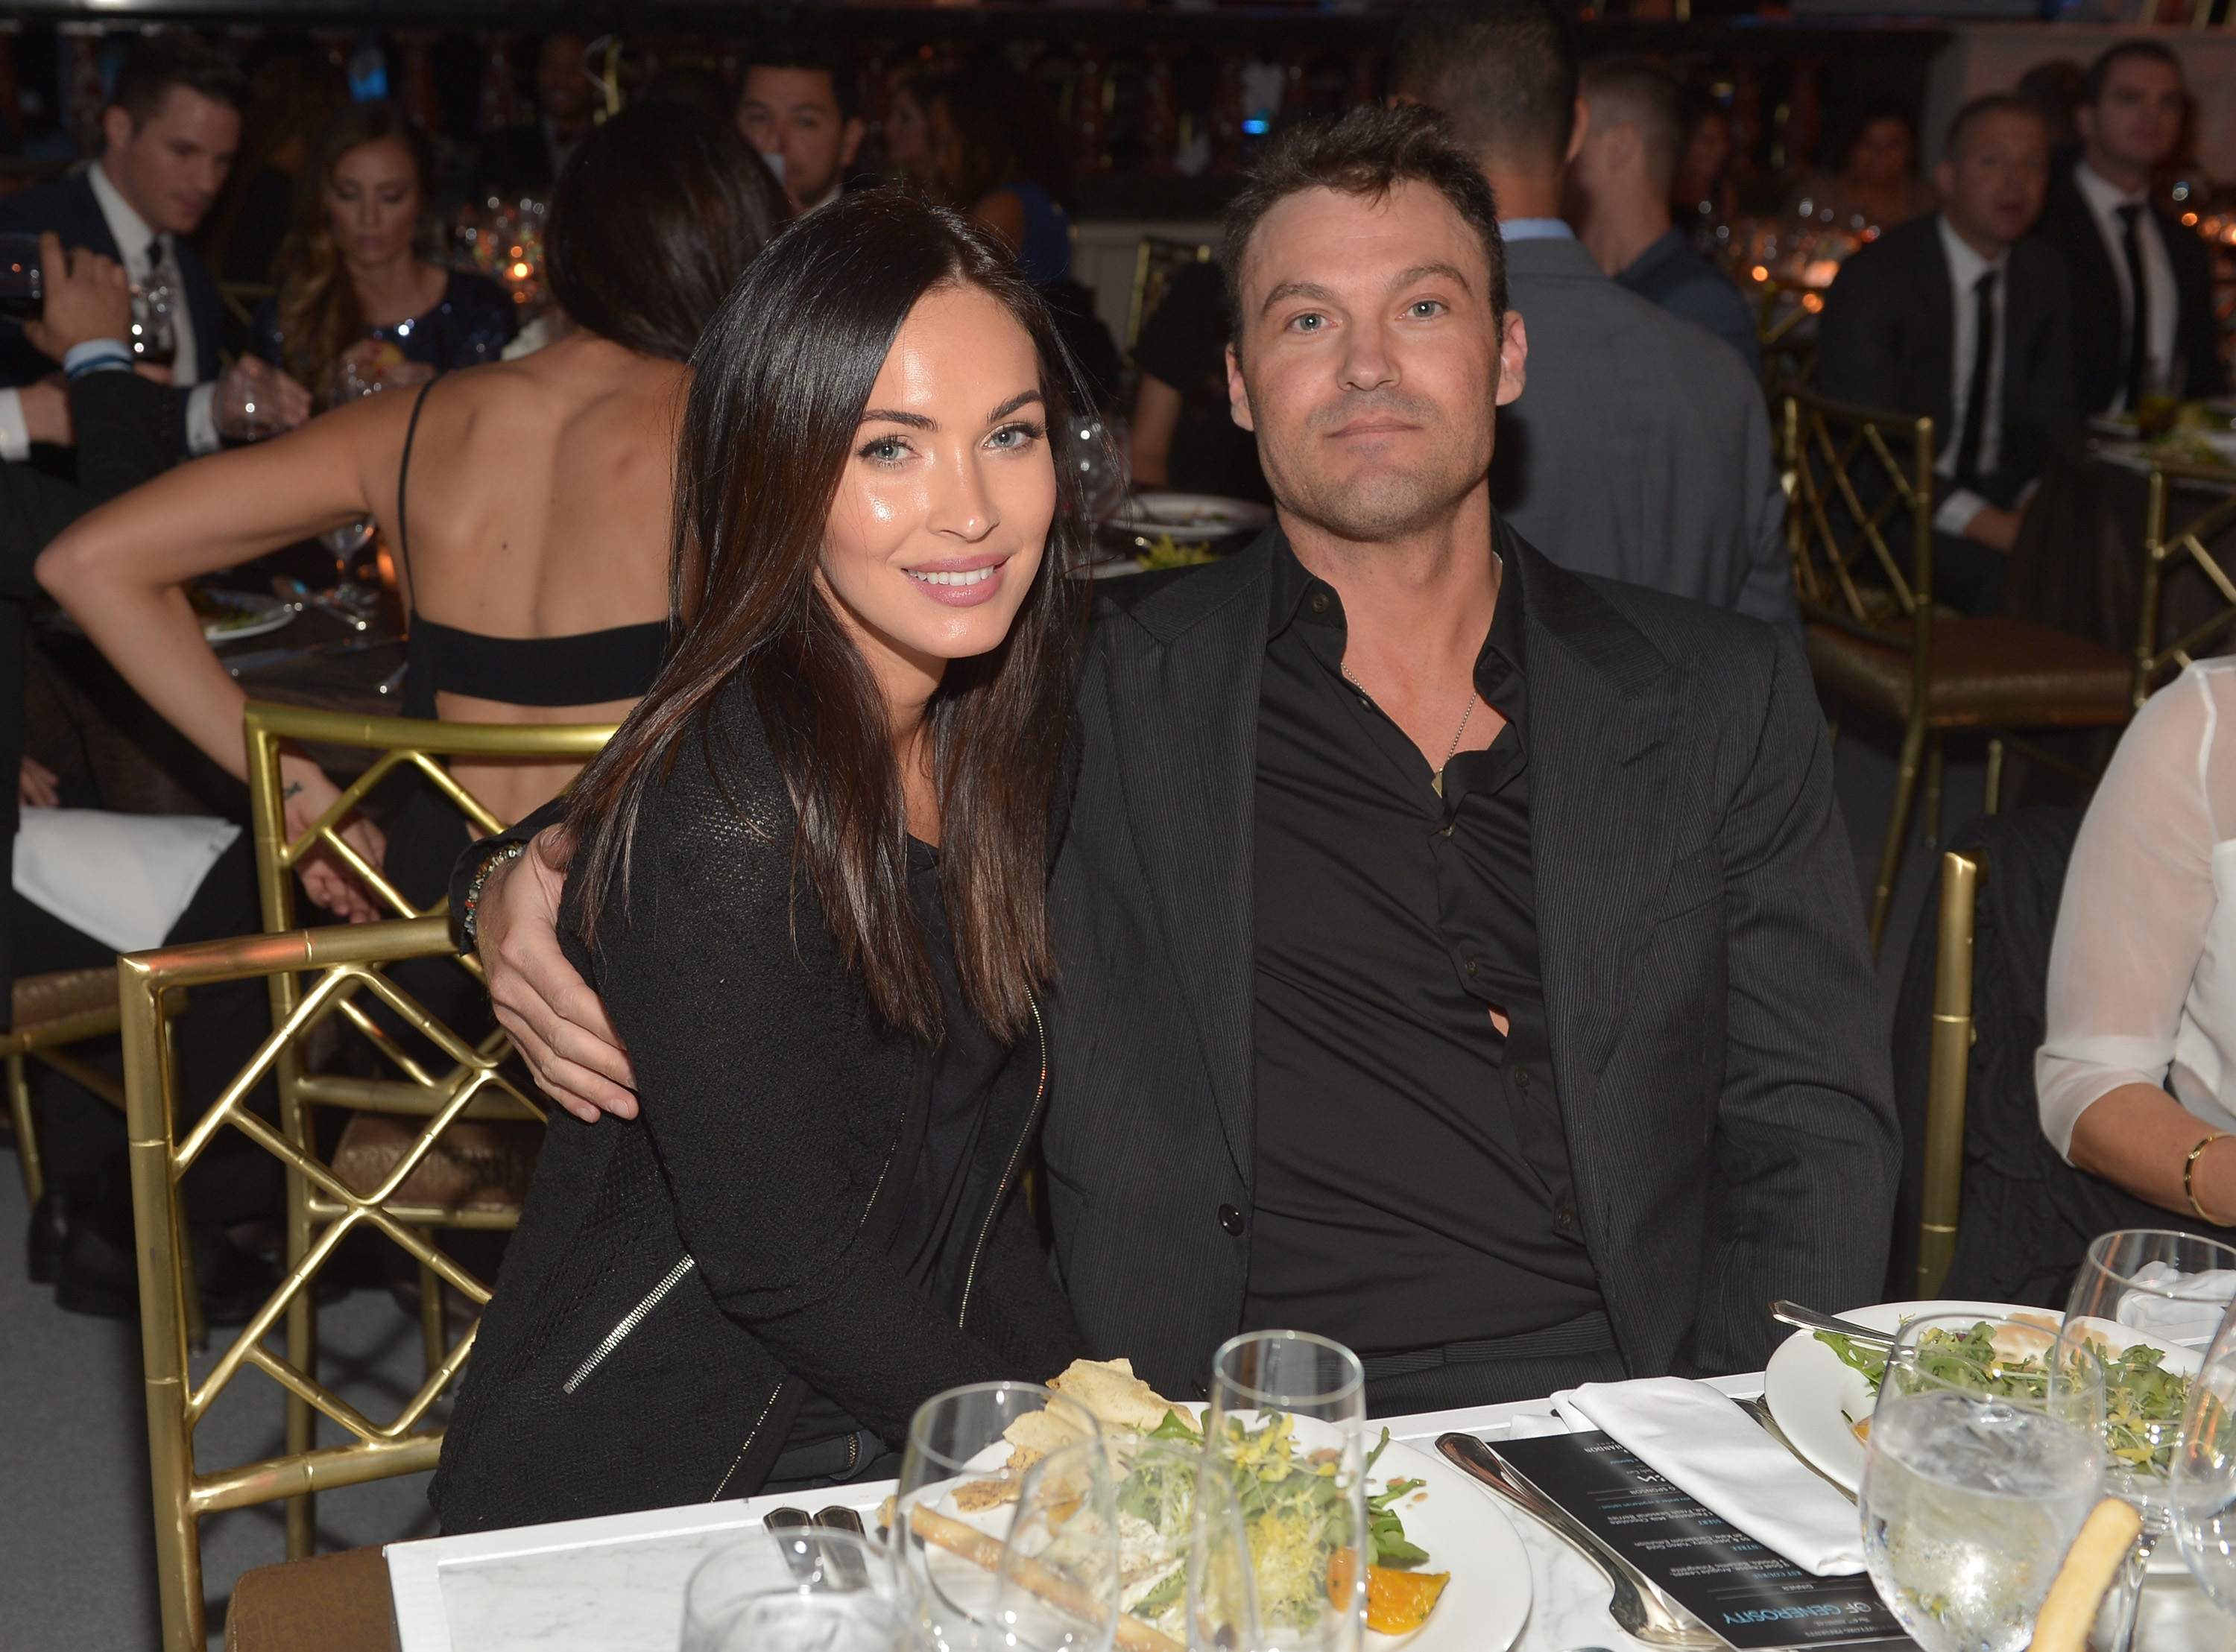 Megan Fox and Brian Austin Green sitting together at an event with dinner plates in front of them